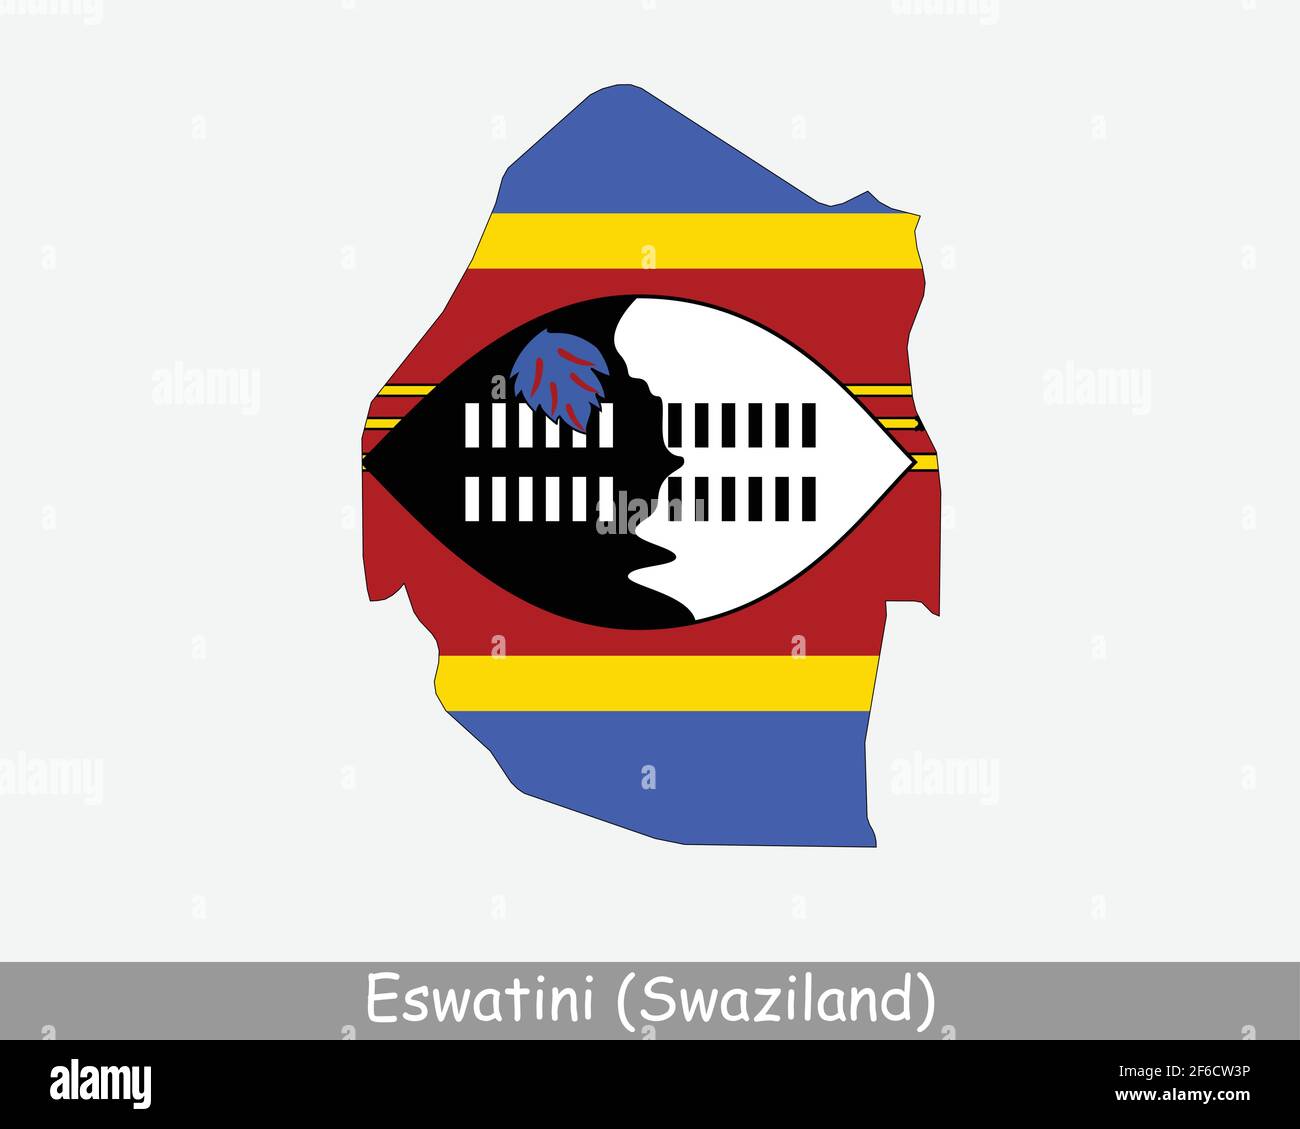 Eswatini Swaziland Flag Map. Map of the Kingdom of Eswatini with the Liswati national flag isolated on a white background. Vector Illustration. Stock Vector